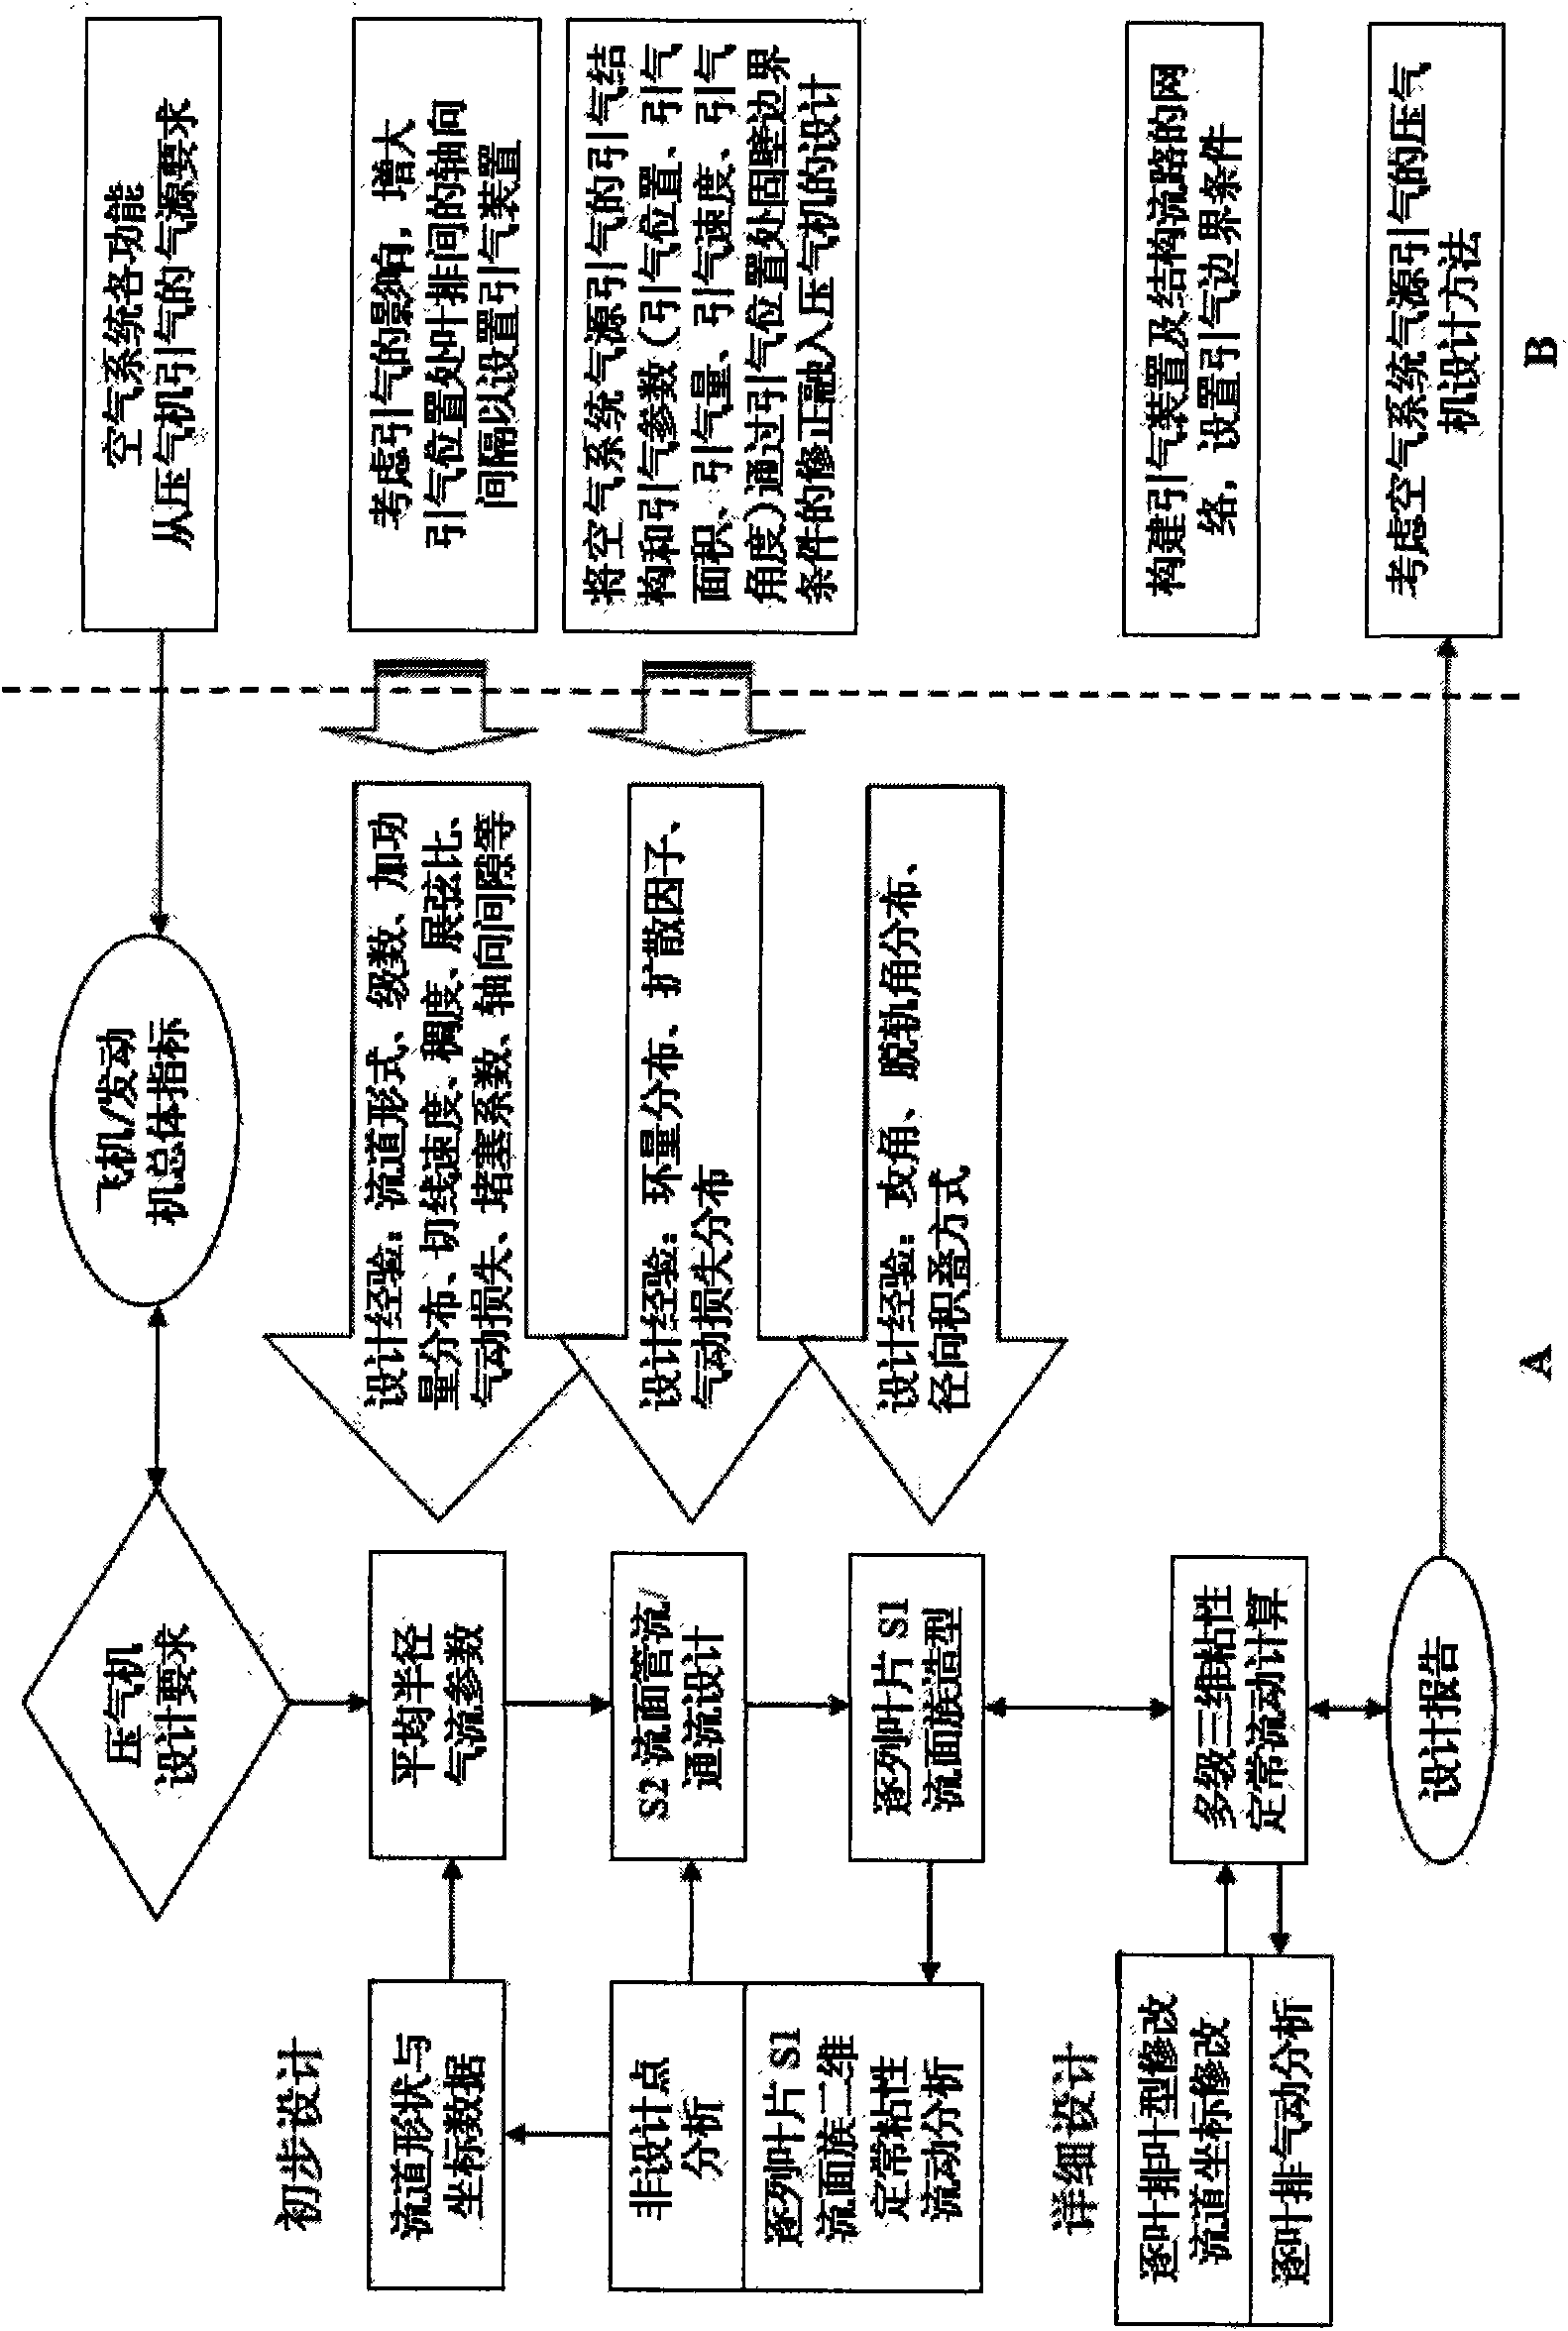 Method for impelling through flow by air compressor time by considering air source bleed air of air system